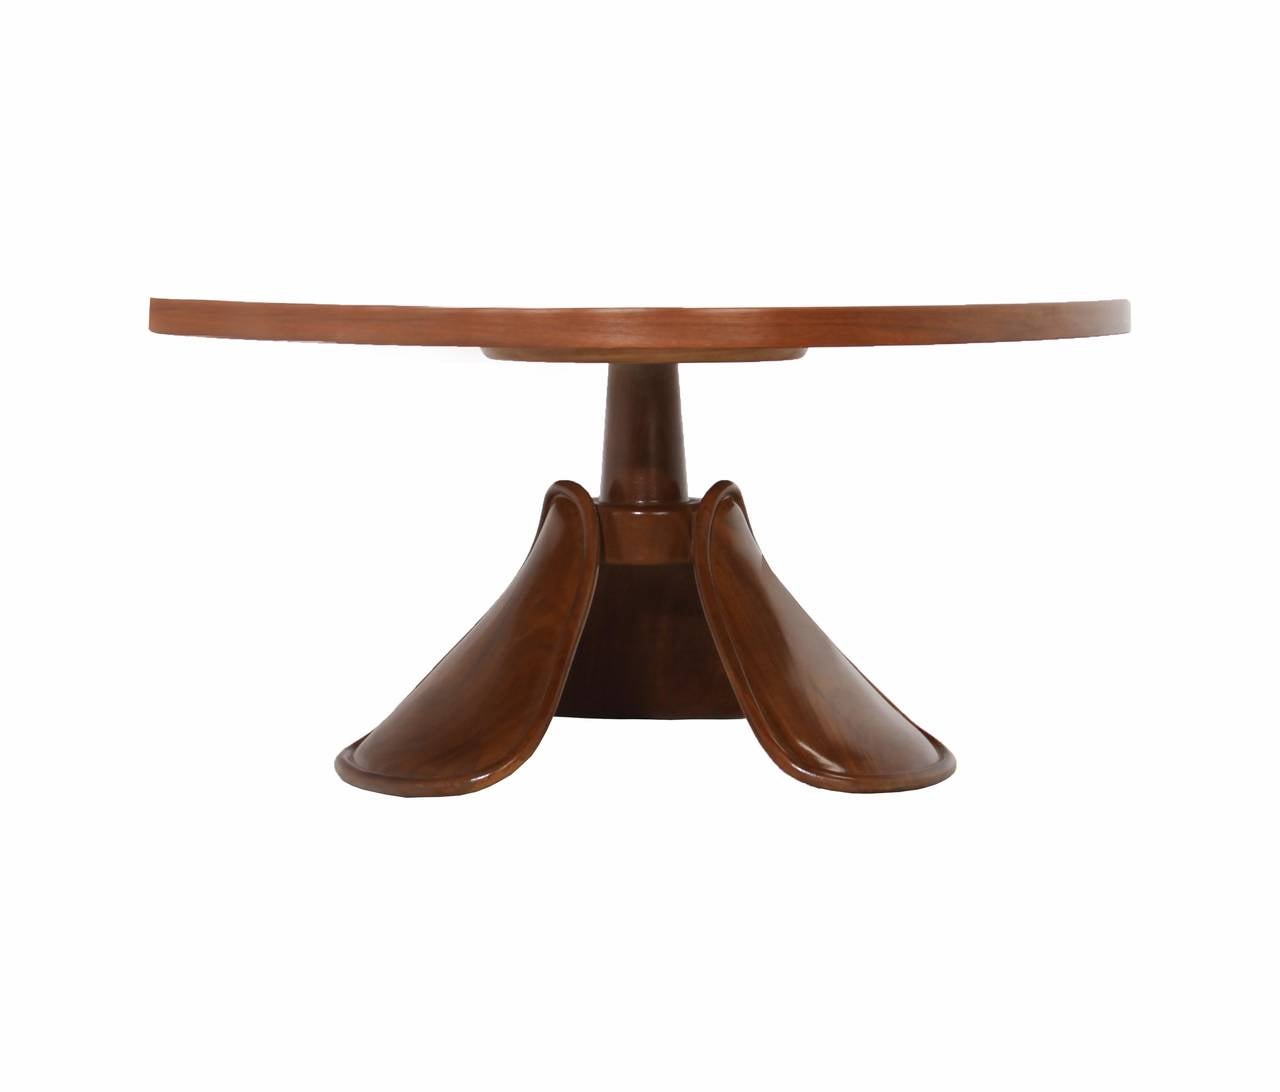 A uniquely shaped California Craftsman rounded triangle top coffee table in Walnut with three sculptural carved Walnut feet with beveled edges. The finish is original and in really good shape with only the most minor blemishes consistent with